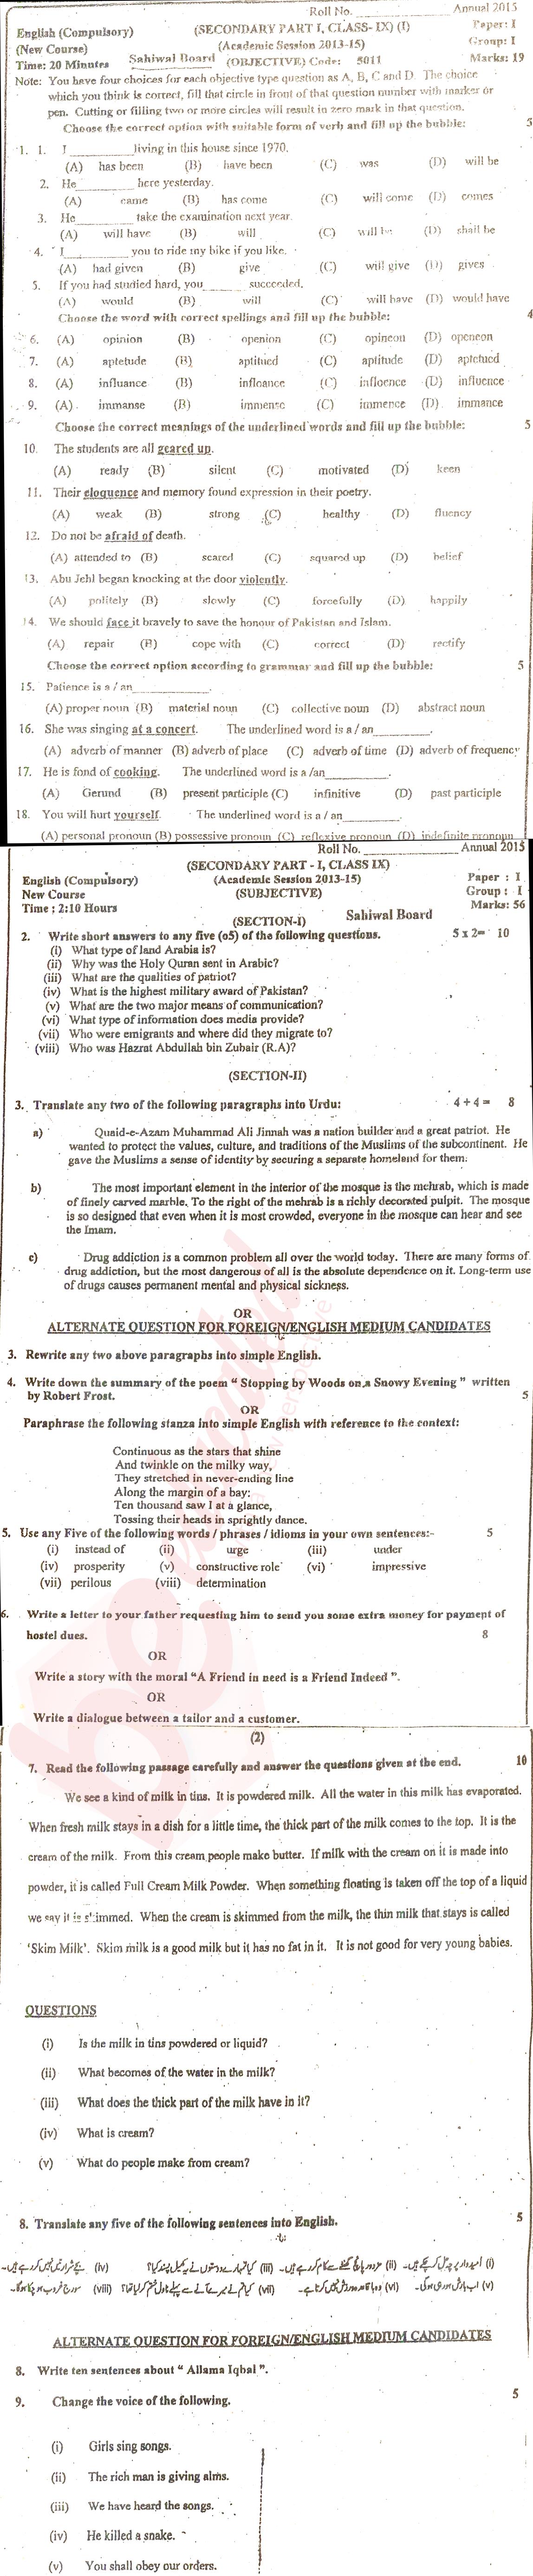 English 9th class Past Paper Group 1 BISE Sahiwal 2015